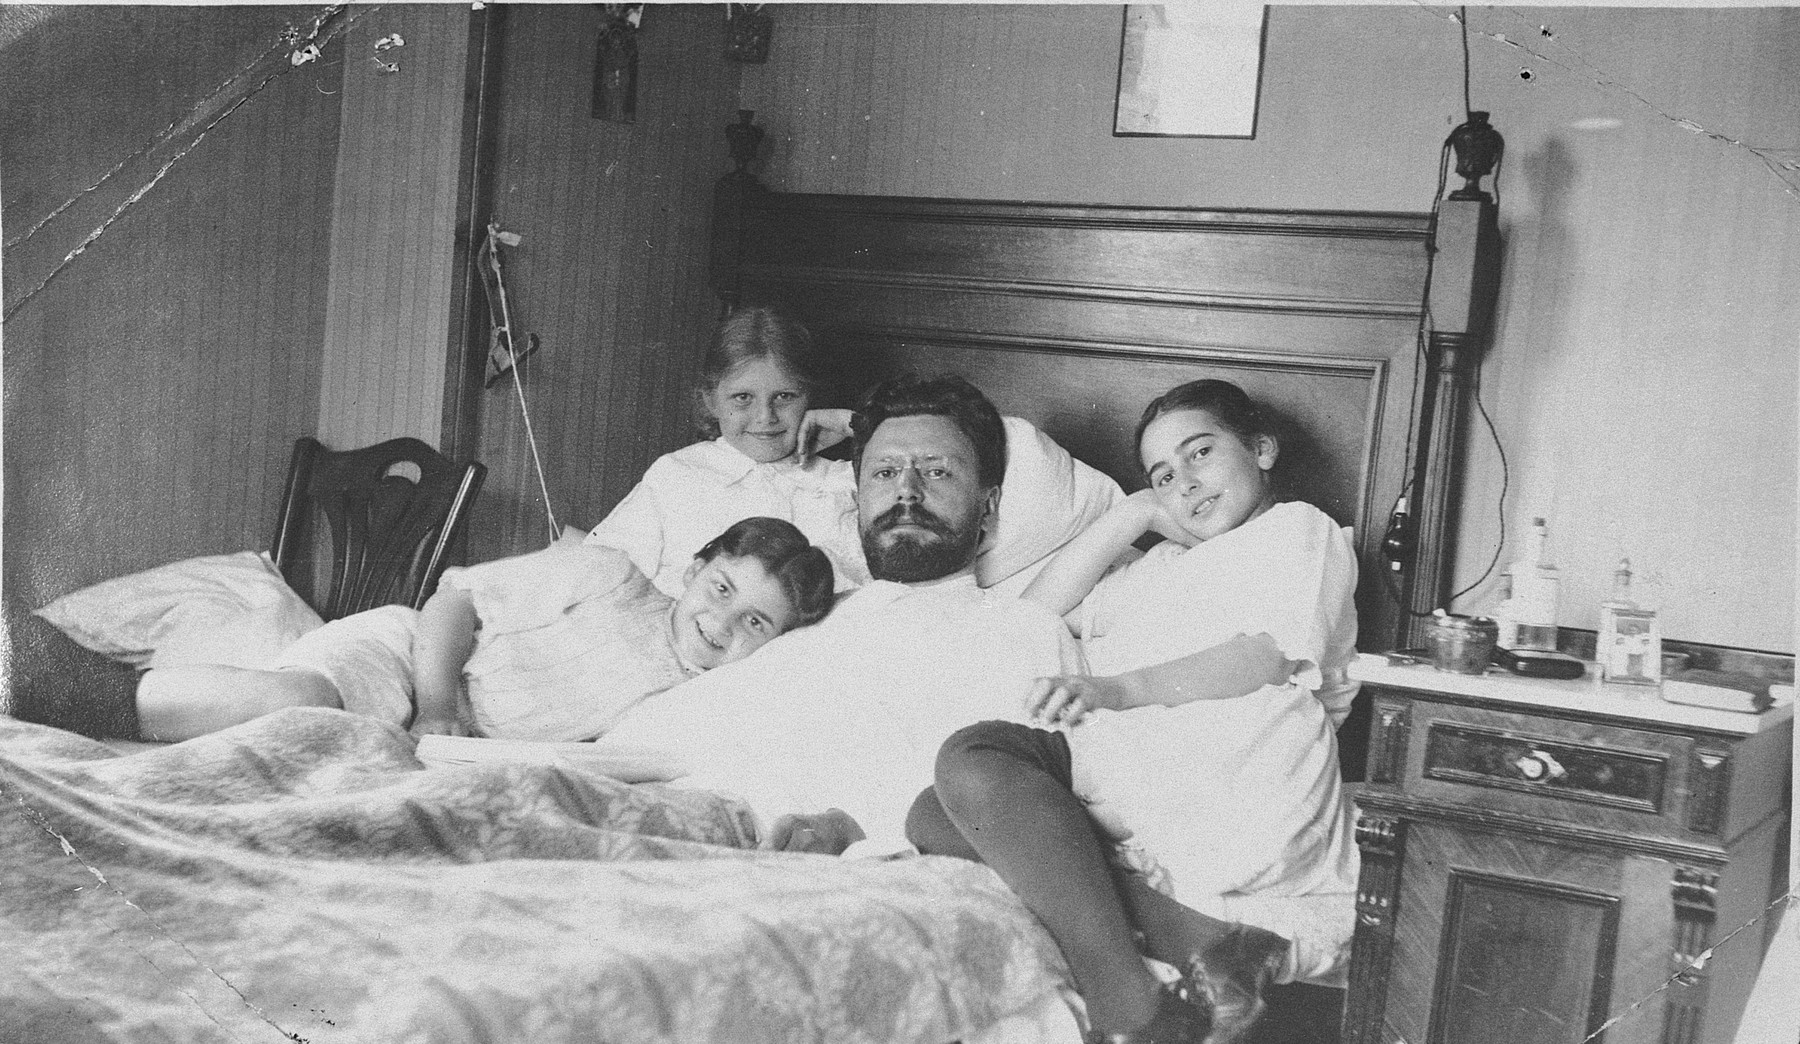 Sophie Libo's grandfather lies in bed surrounded by his daughter, Nina, and two nieces.